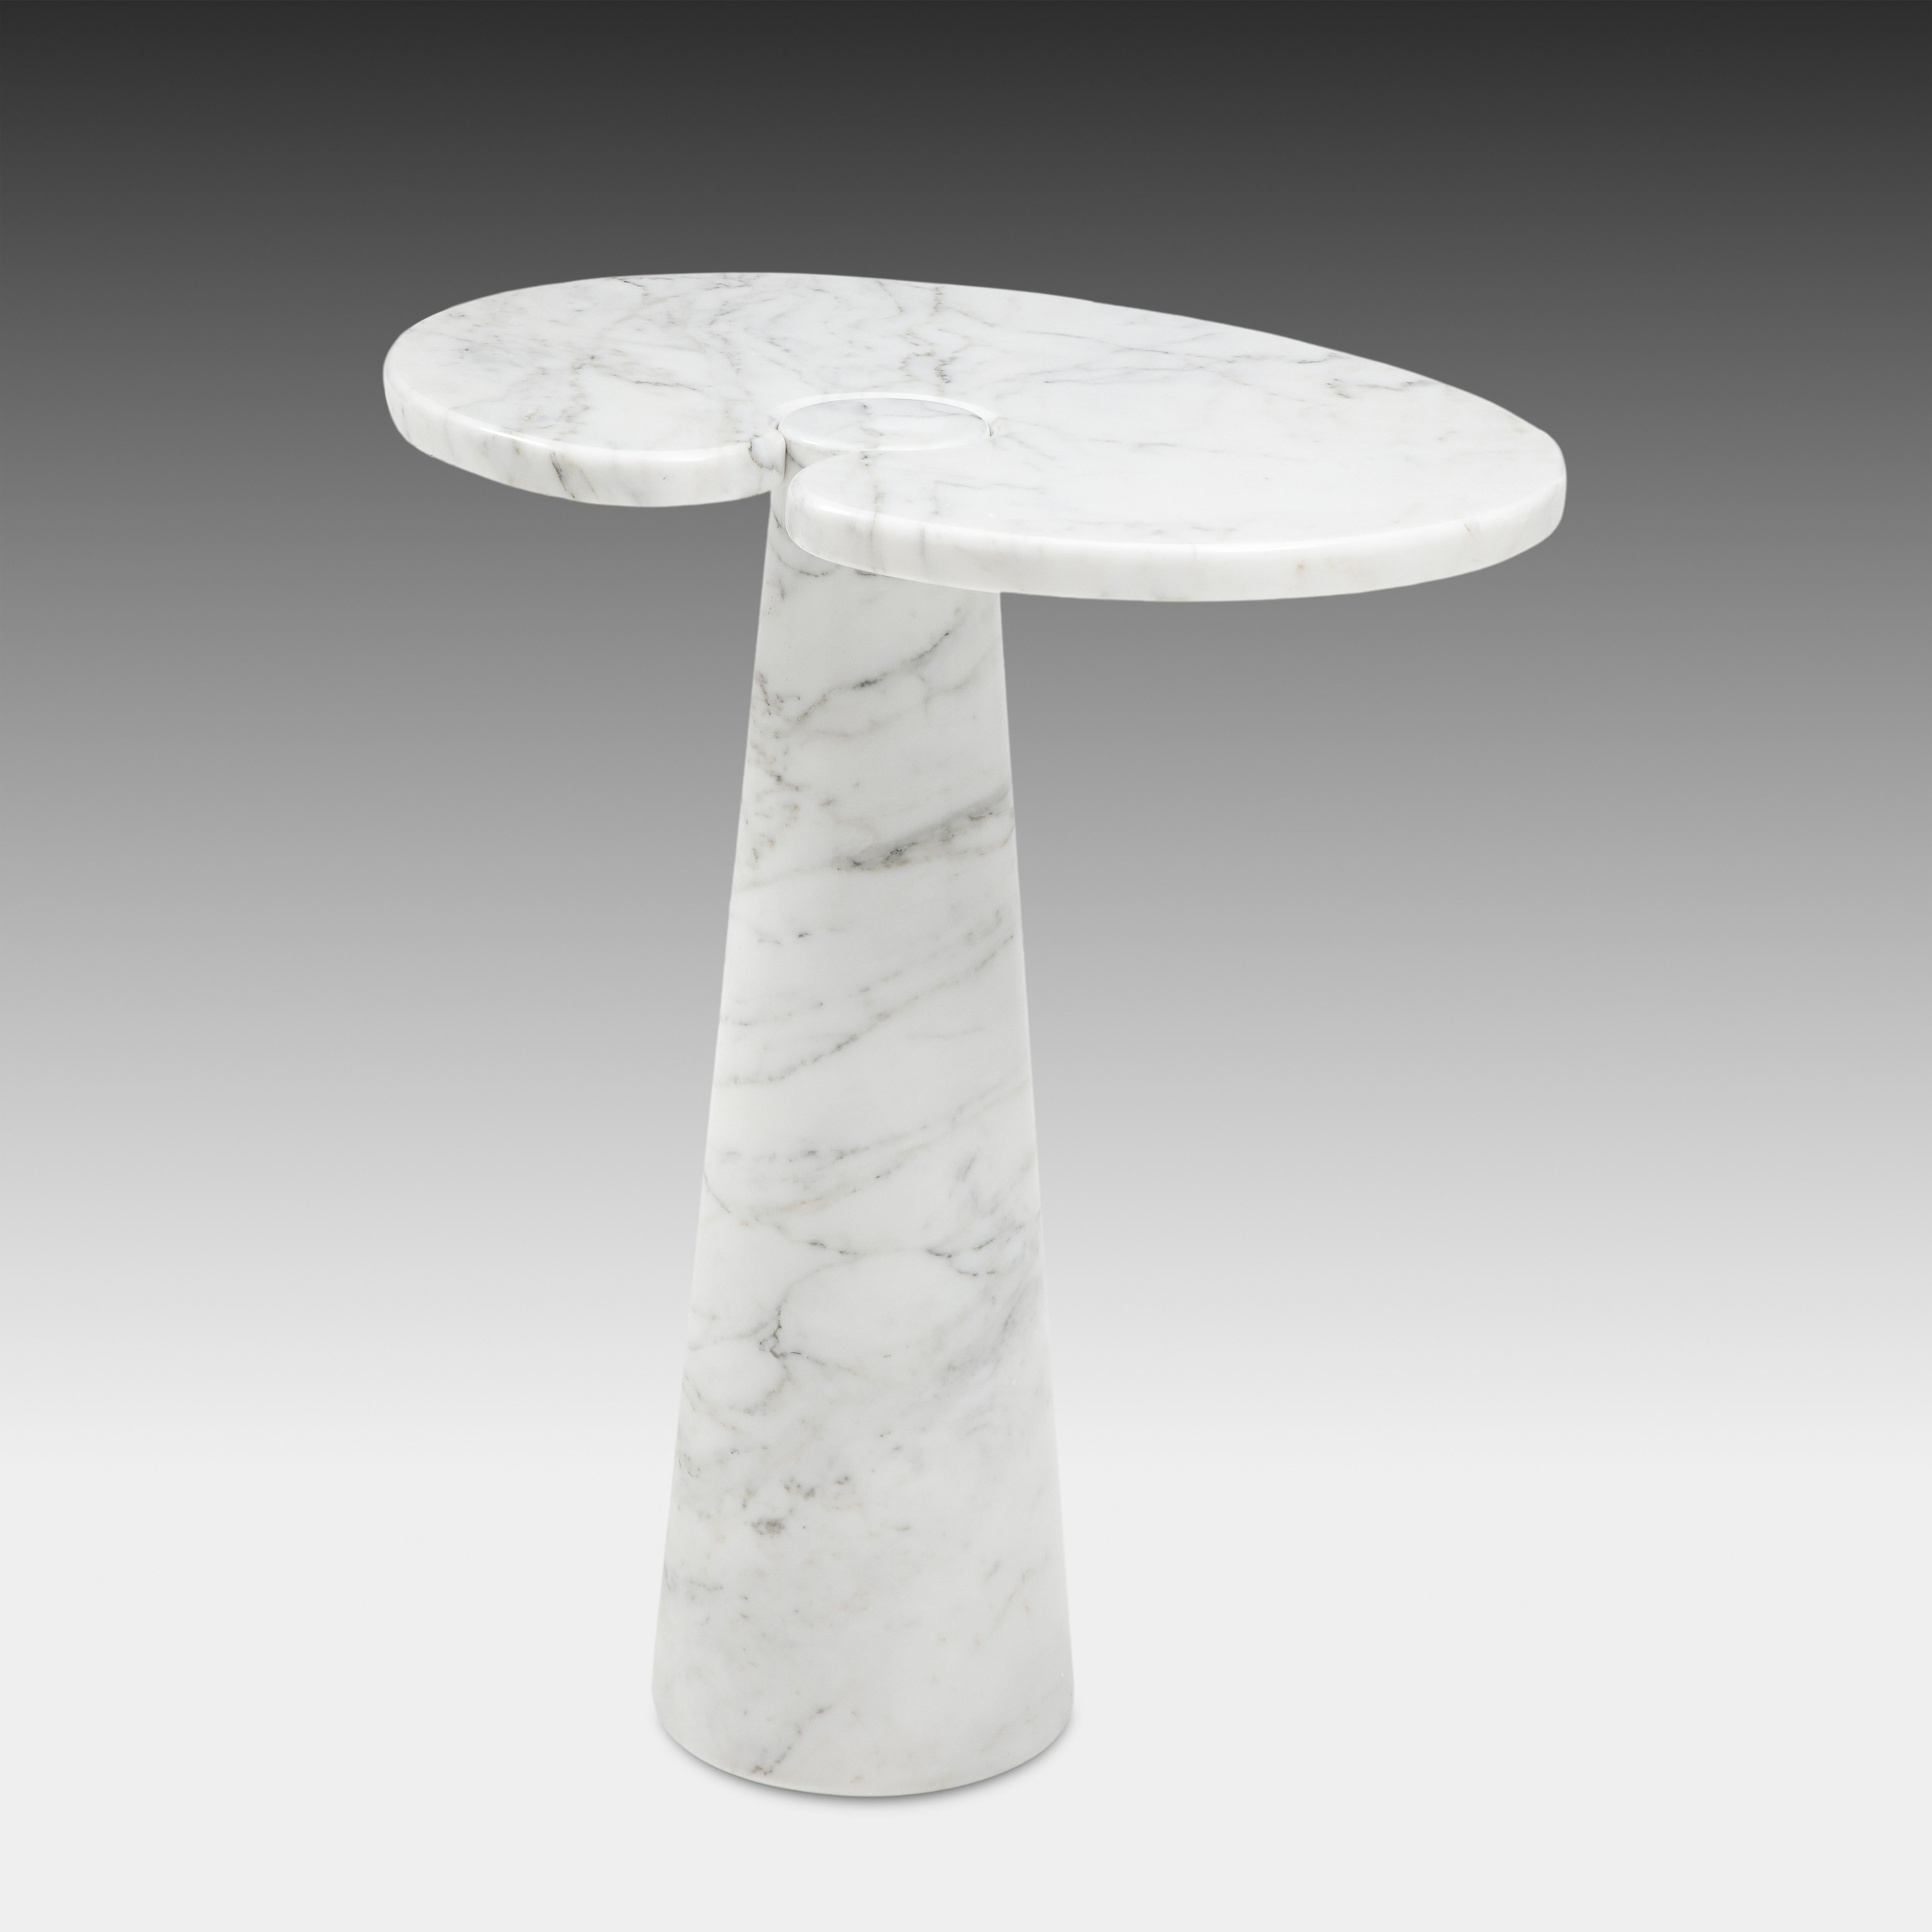 Designed by Angelo Mangiarotti for Skipper from the 'Eros' series, Carrara marble tall side table or console with top fitted on a conical base. This elegantly organic table has beautiful subtle veining throughout. Original Skipper label on